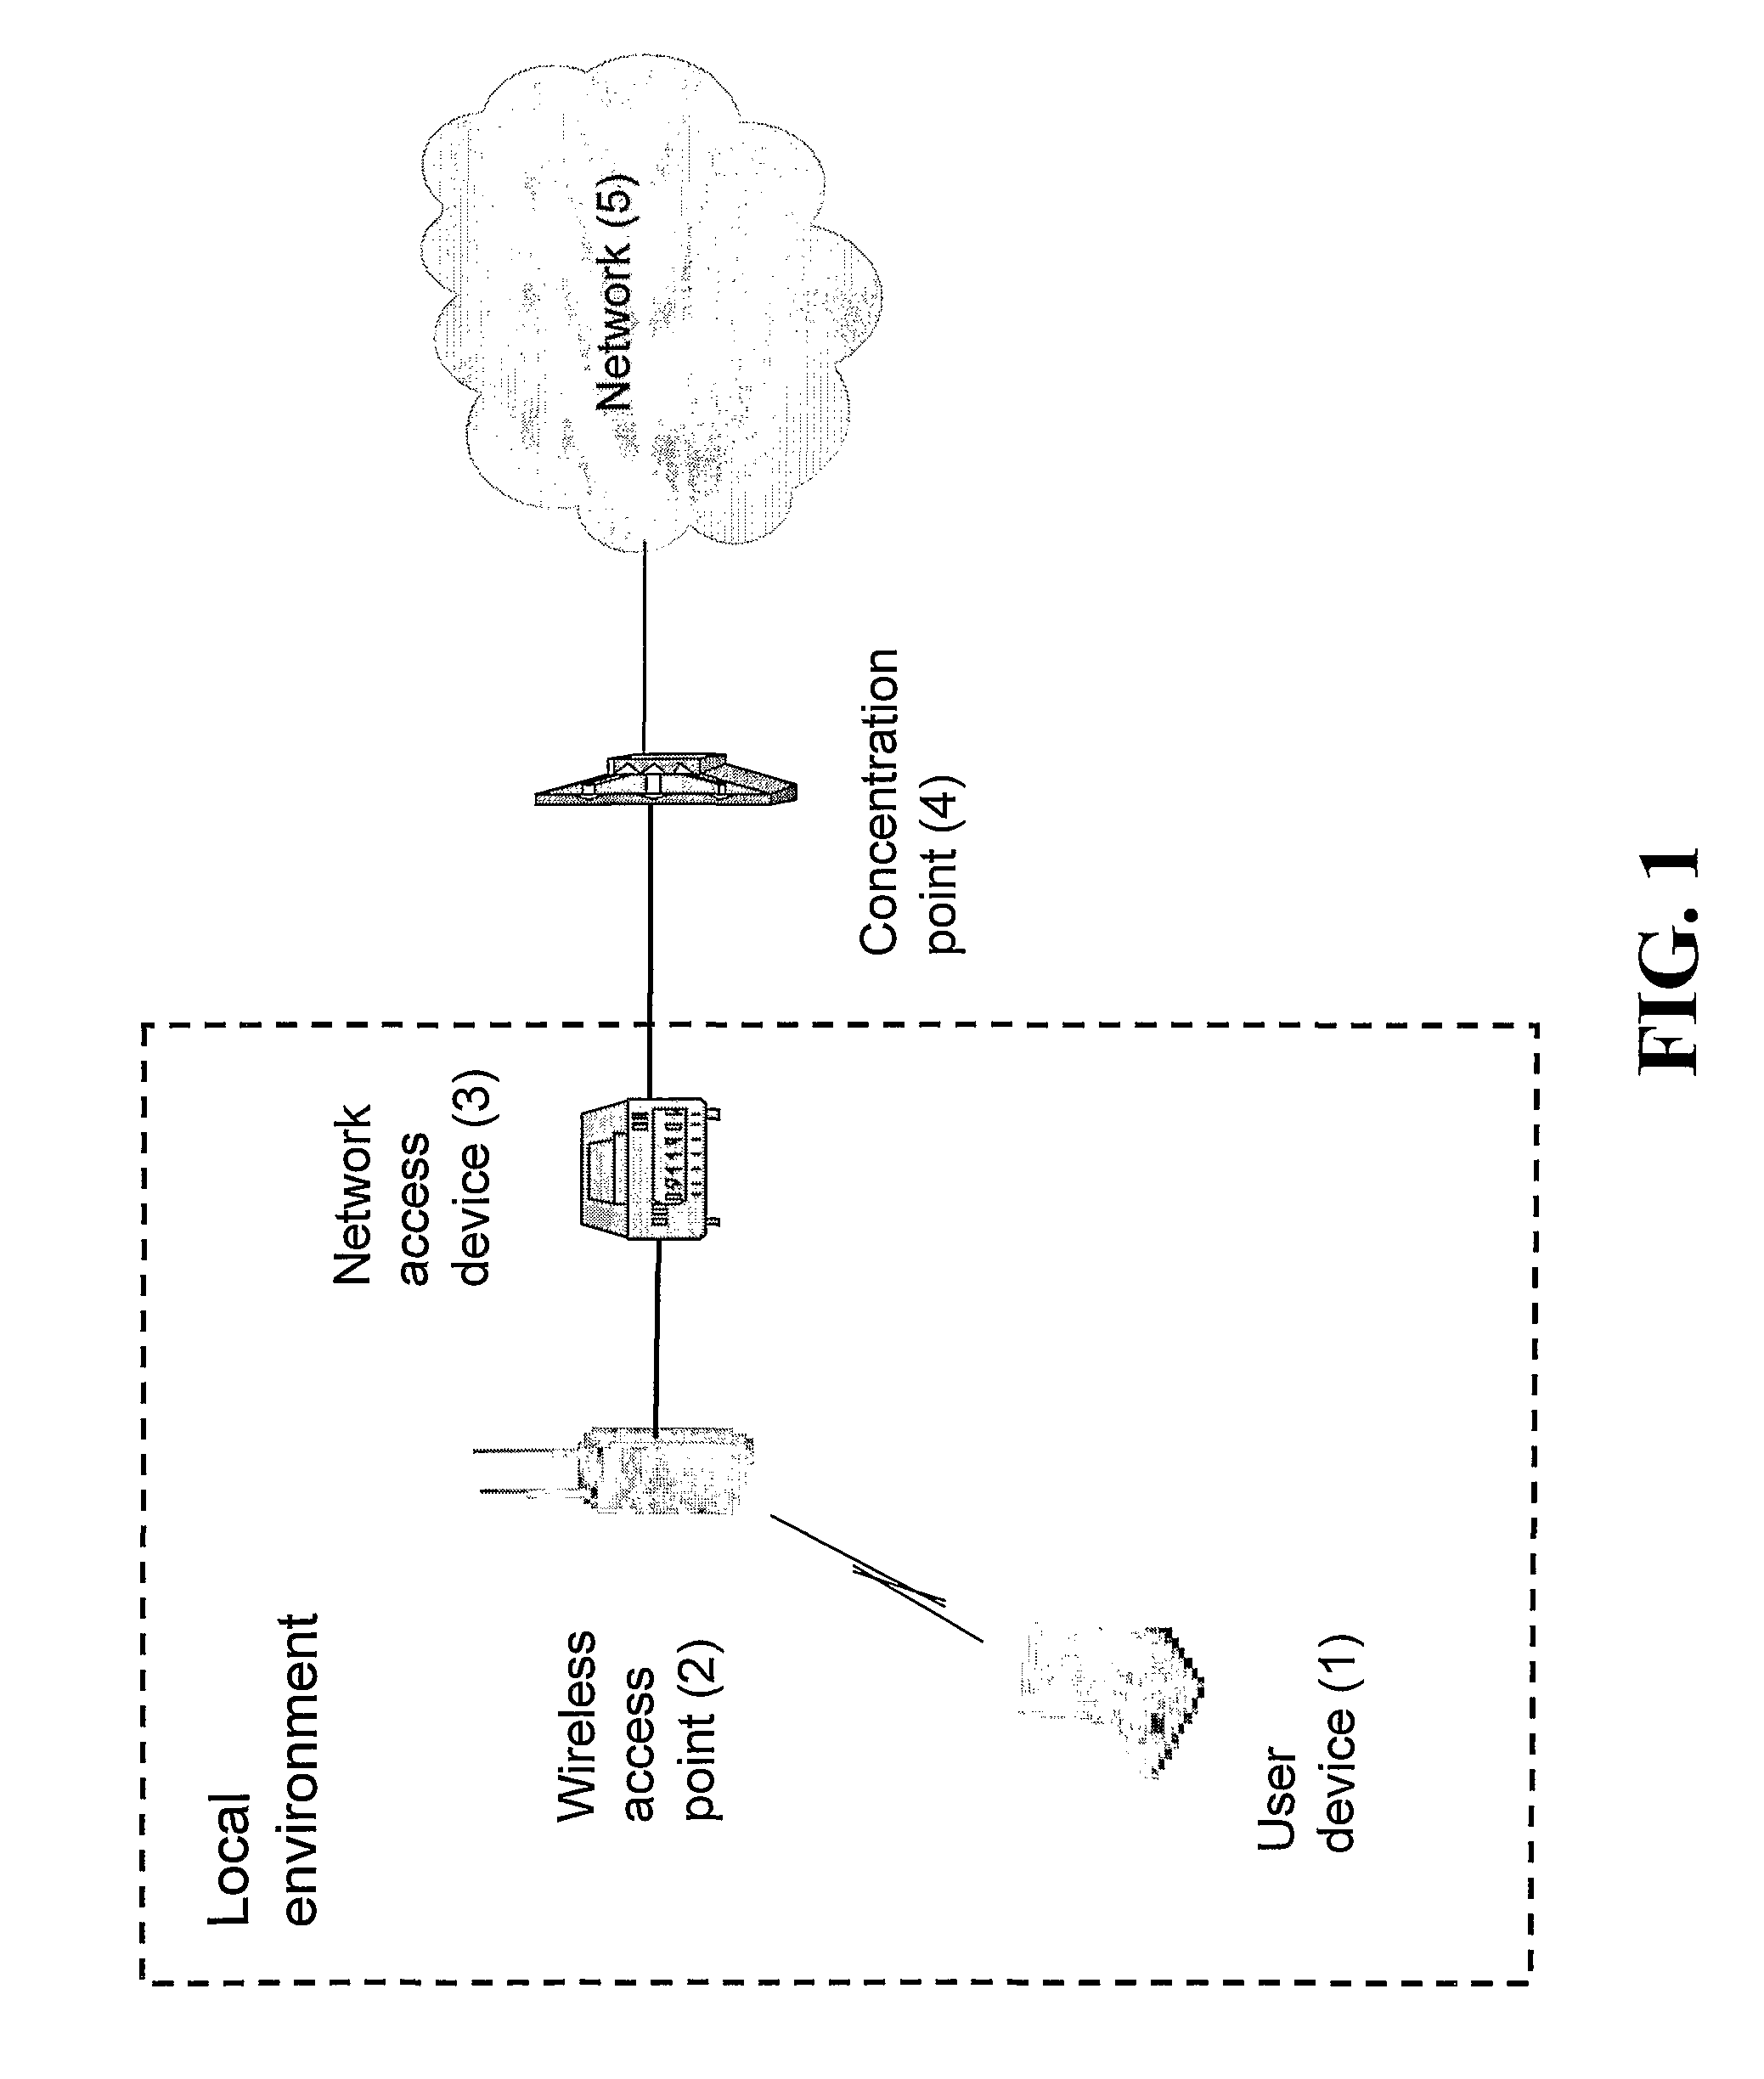 Concept for enabling access to a network using local wireless network